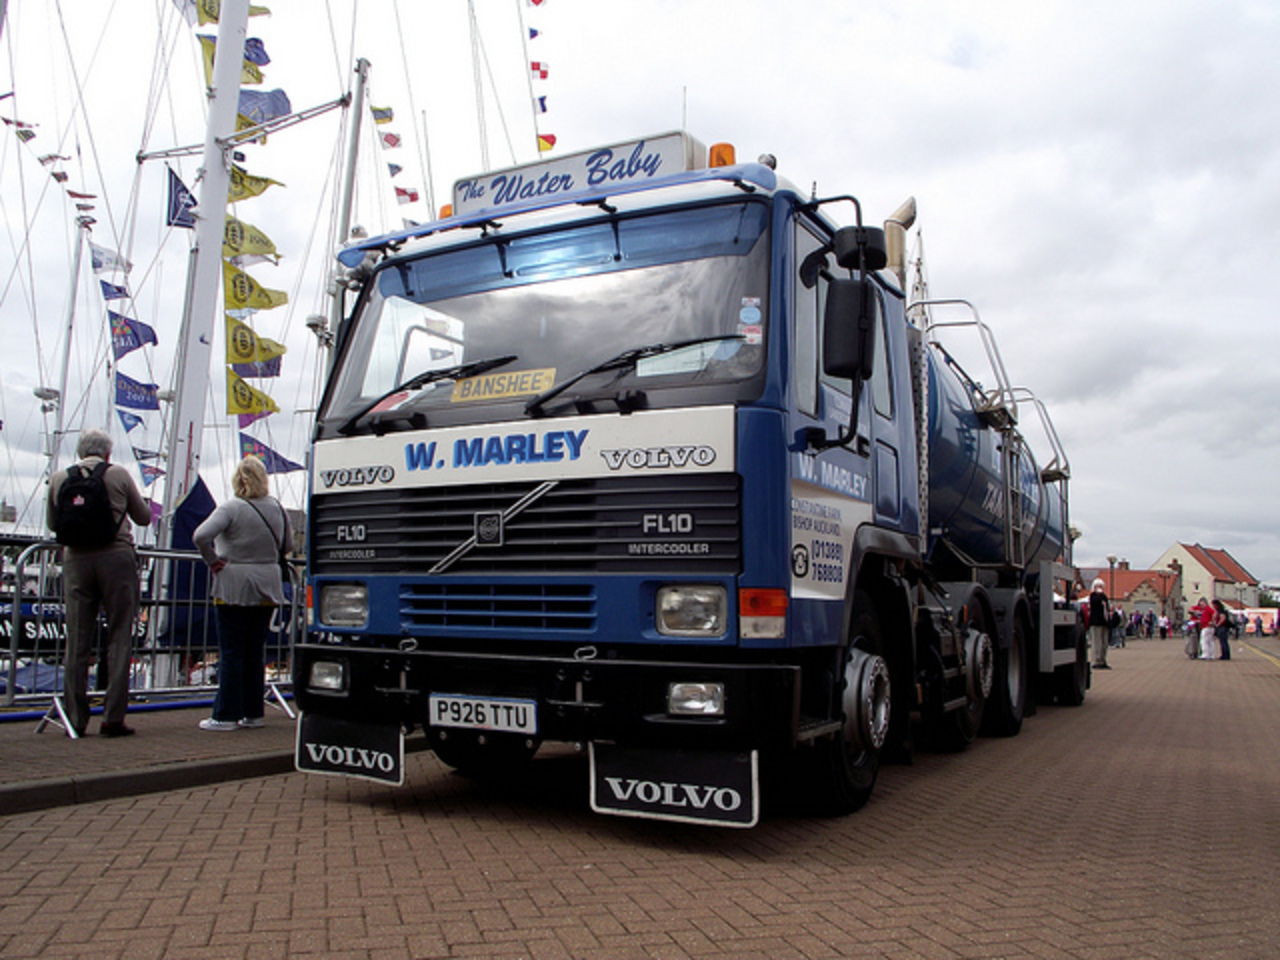 A W.Marley Volvo FL10 Intercooler lorry,called The Water Baby,